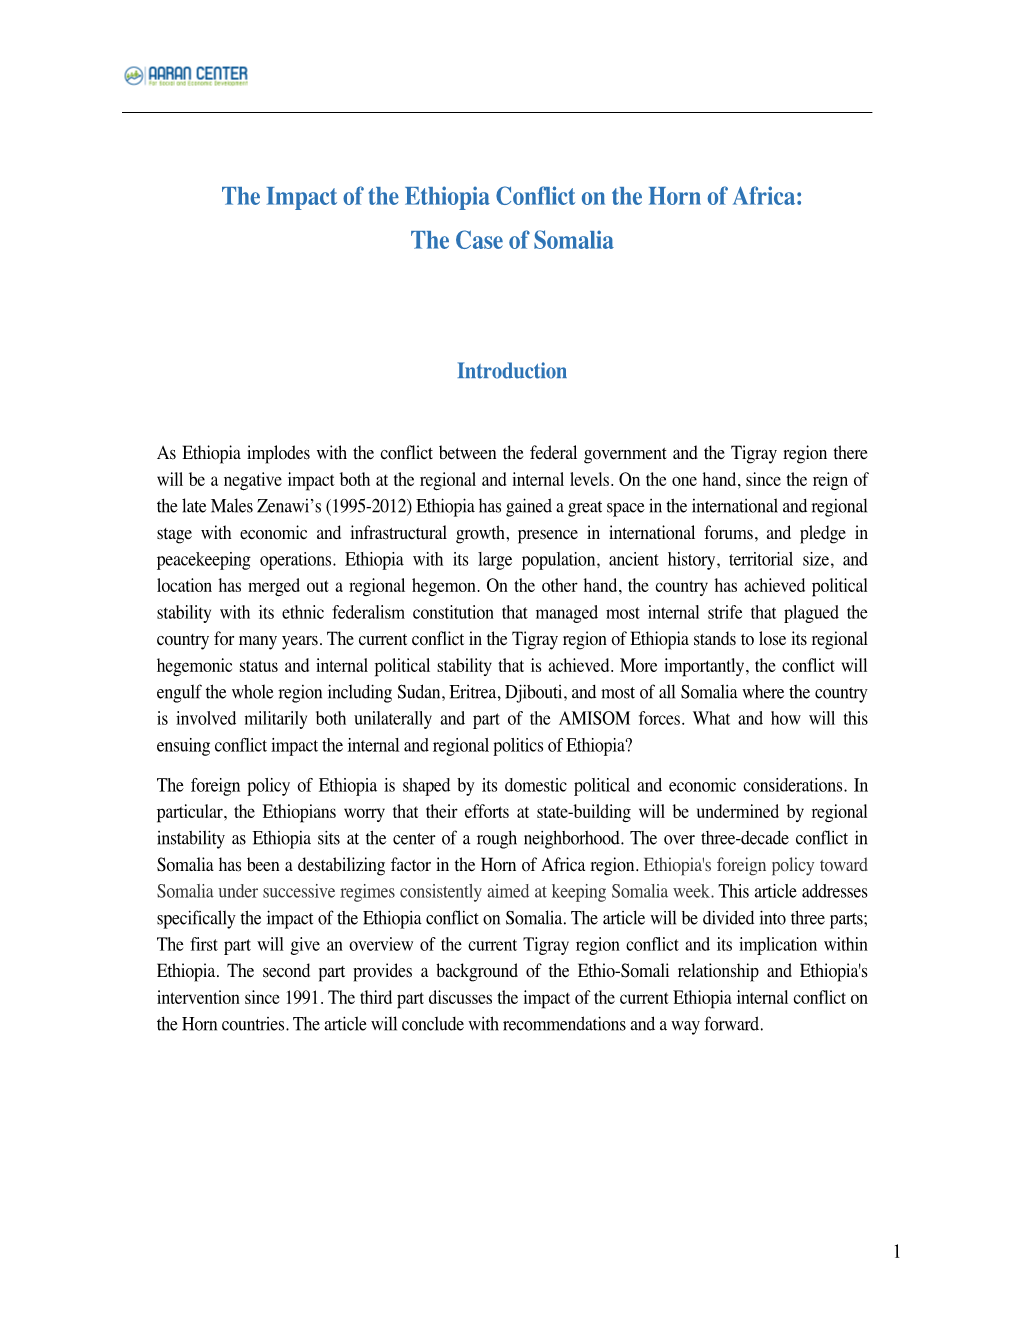 The Impact of the Ethiopia Conflict on the Horn of Africa: the Case of Somalia